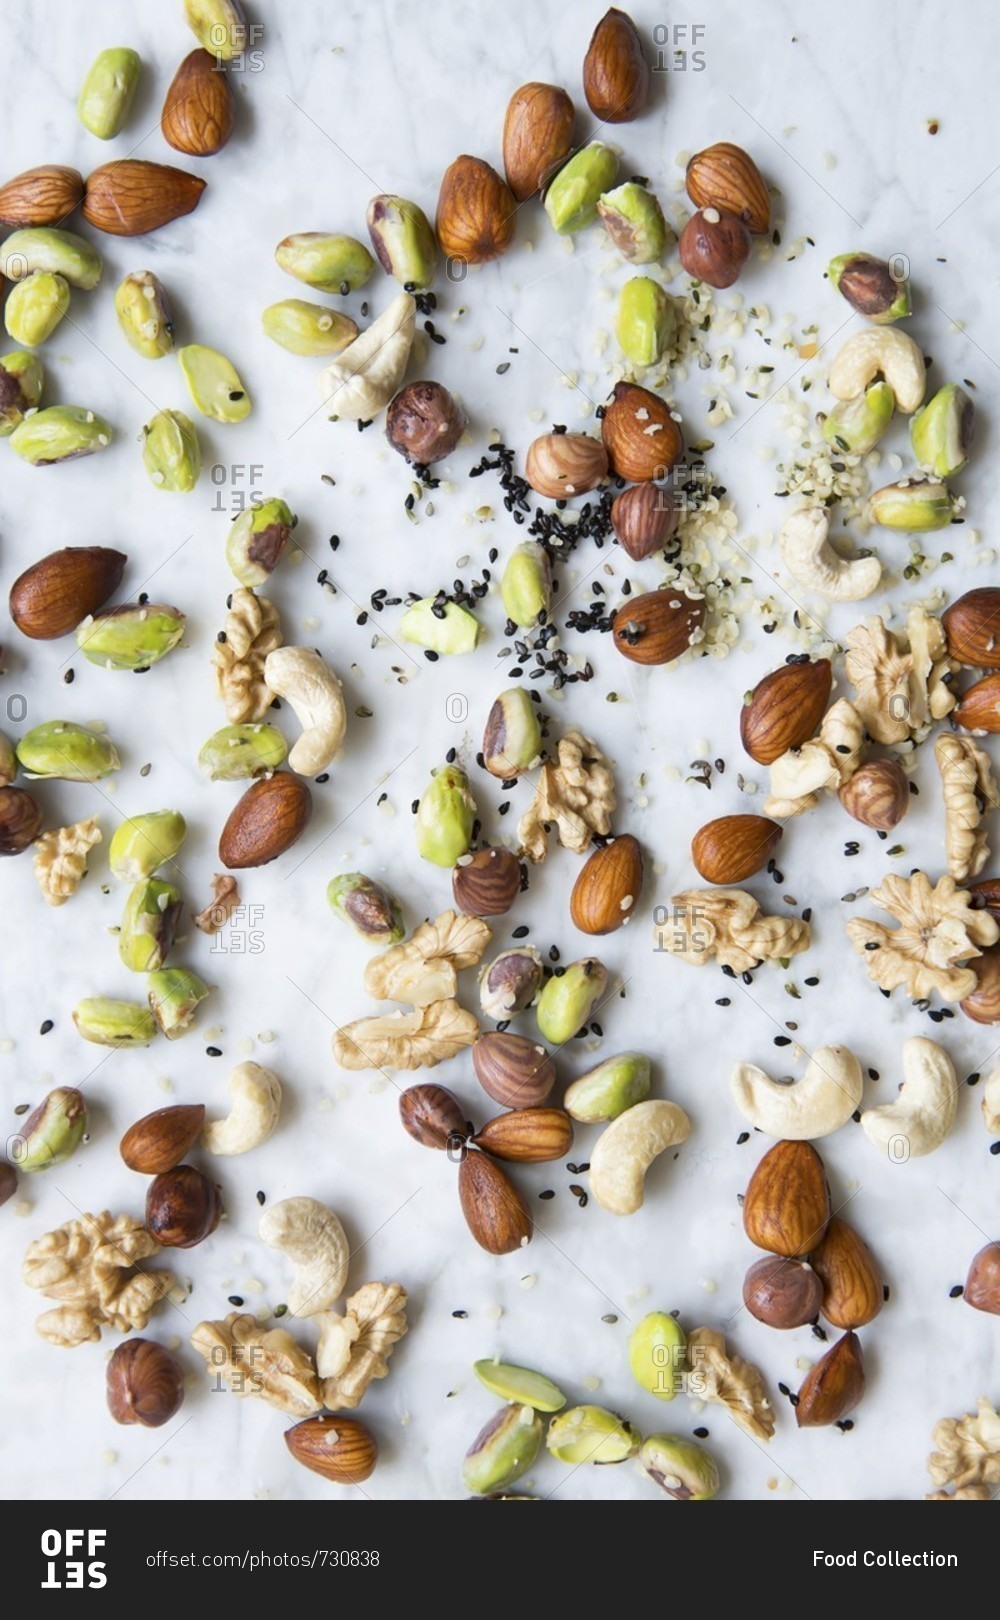 Sprouts, almonds, walnuts, cashews, pistachios, sesame and hemp seeds